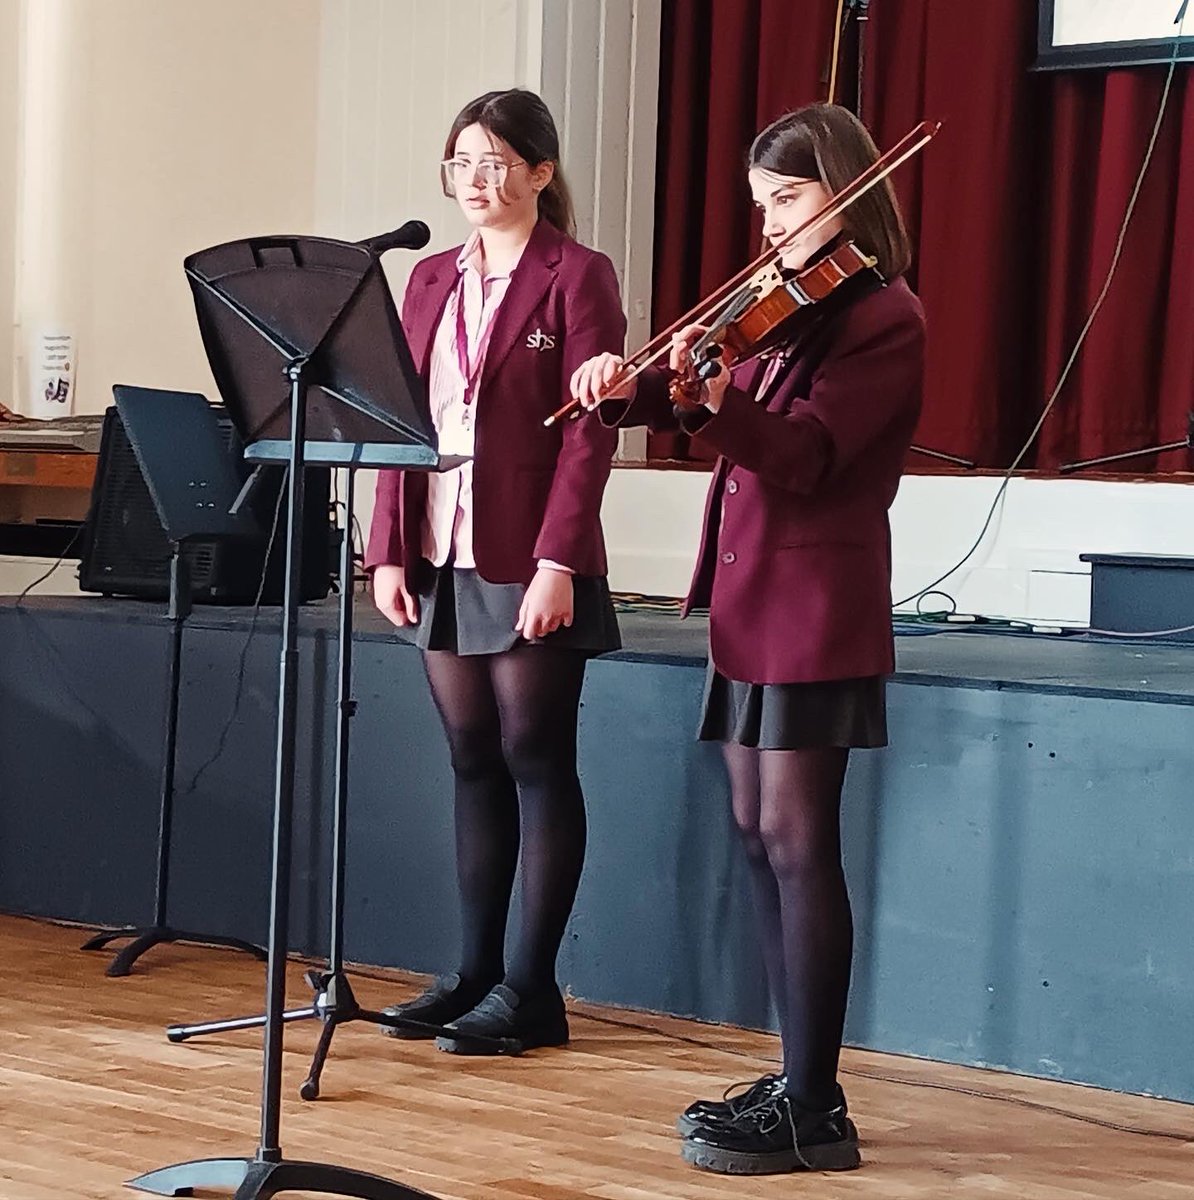 We had a brilliant day of #shshousemusic yesterday with students from all year groups taking part 🎶 Many thanks to cellist, Emma Denton, for being our guest judge, and a big well done to overall winners #shsarundel 🏆👏💜 #spiritoffun #everythingispossible